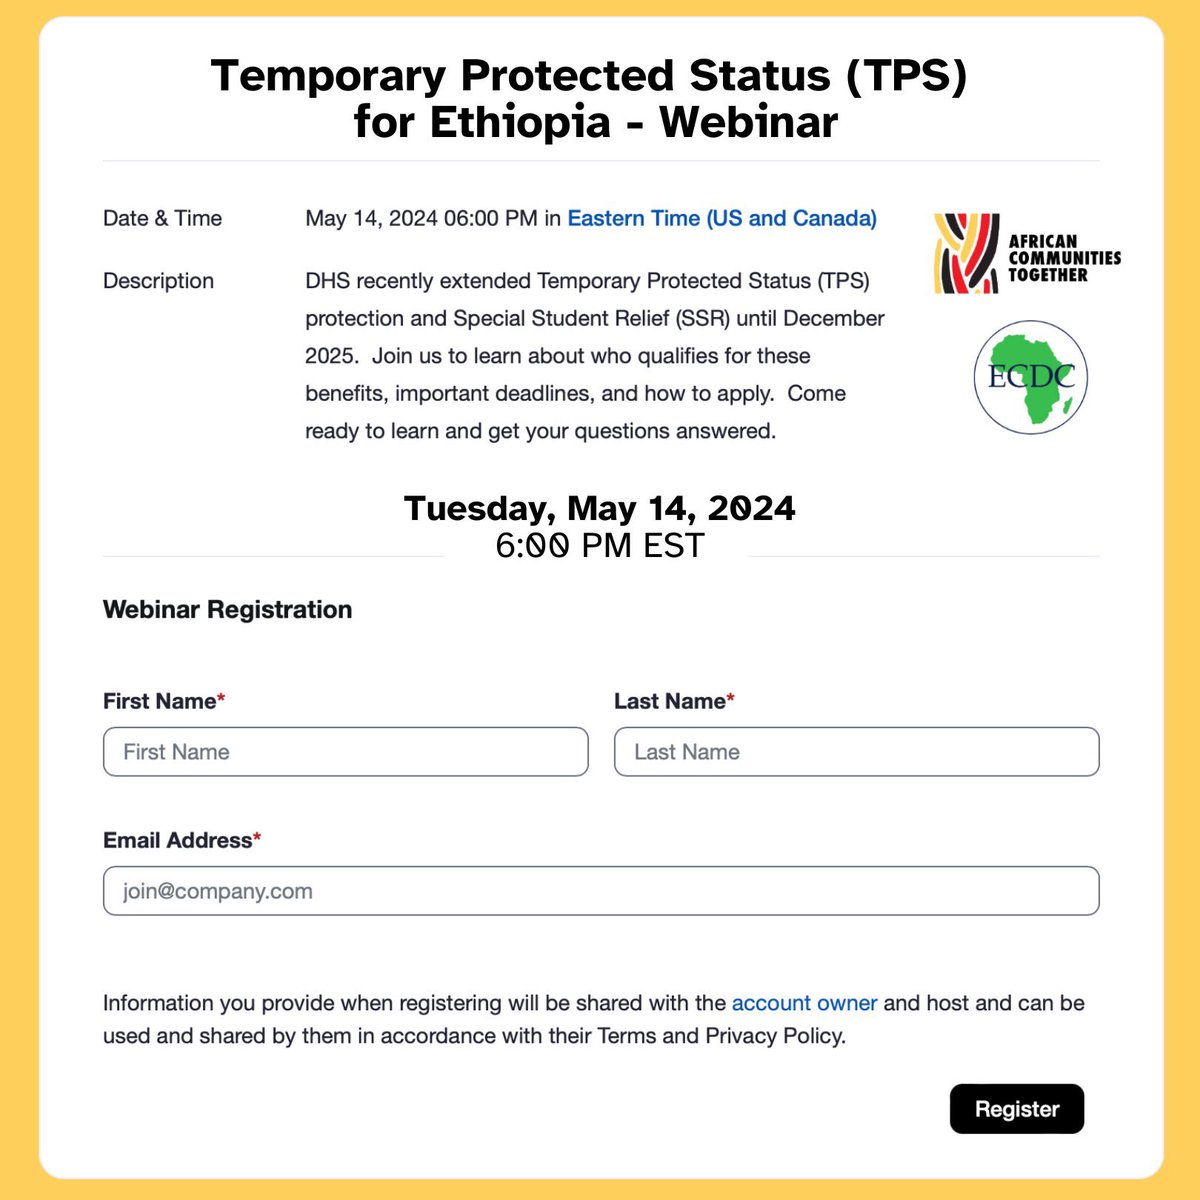 Join @ECDCUS & @AfricansUS today at 6pm EST for a webinar on Temporary Protective Status (TPS) for Ethiopians. Click the link to attend & learn about the program, important deadlines as well as application procedures. Don't miss this opportunity! africans-us.zoom.us/webinar/regist…